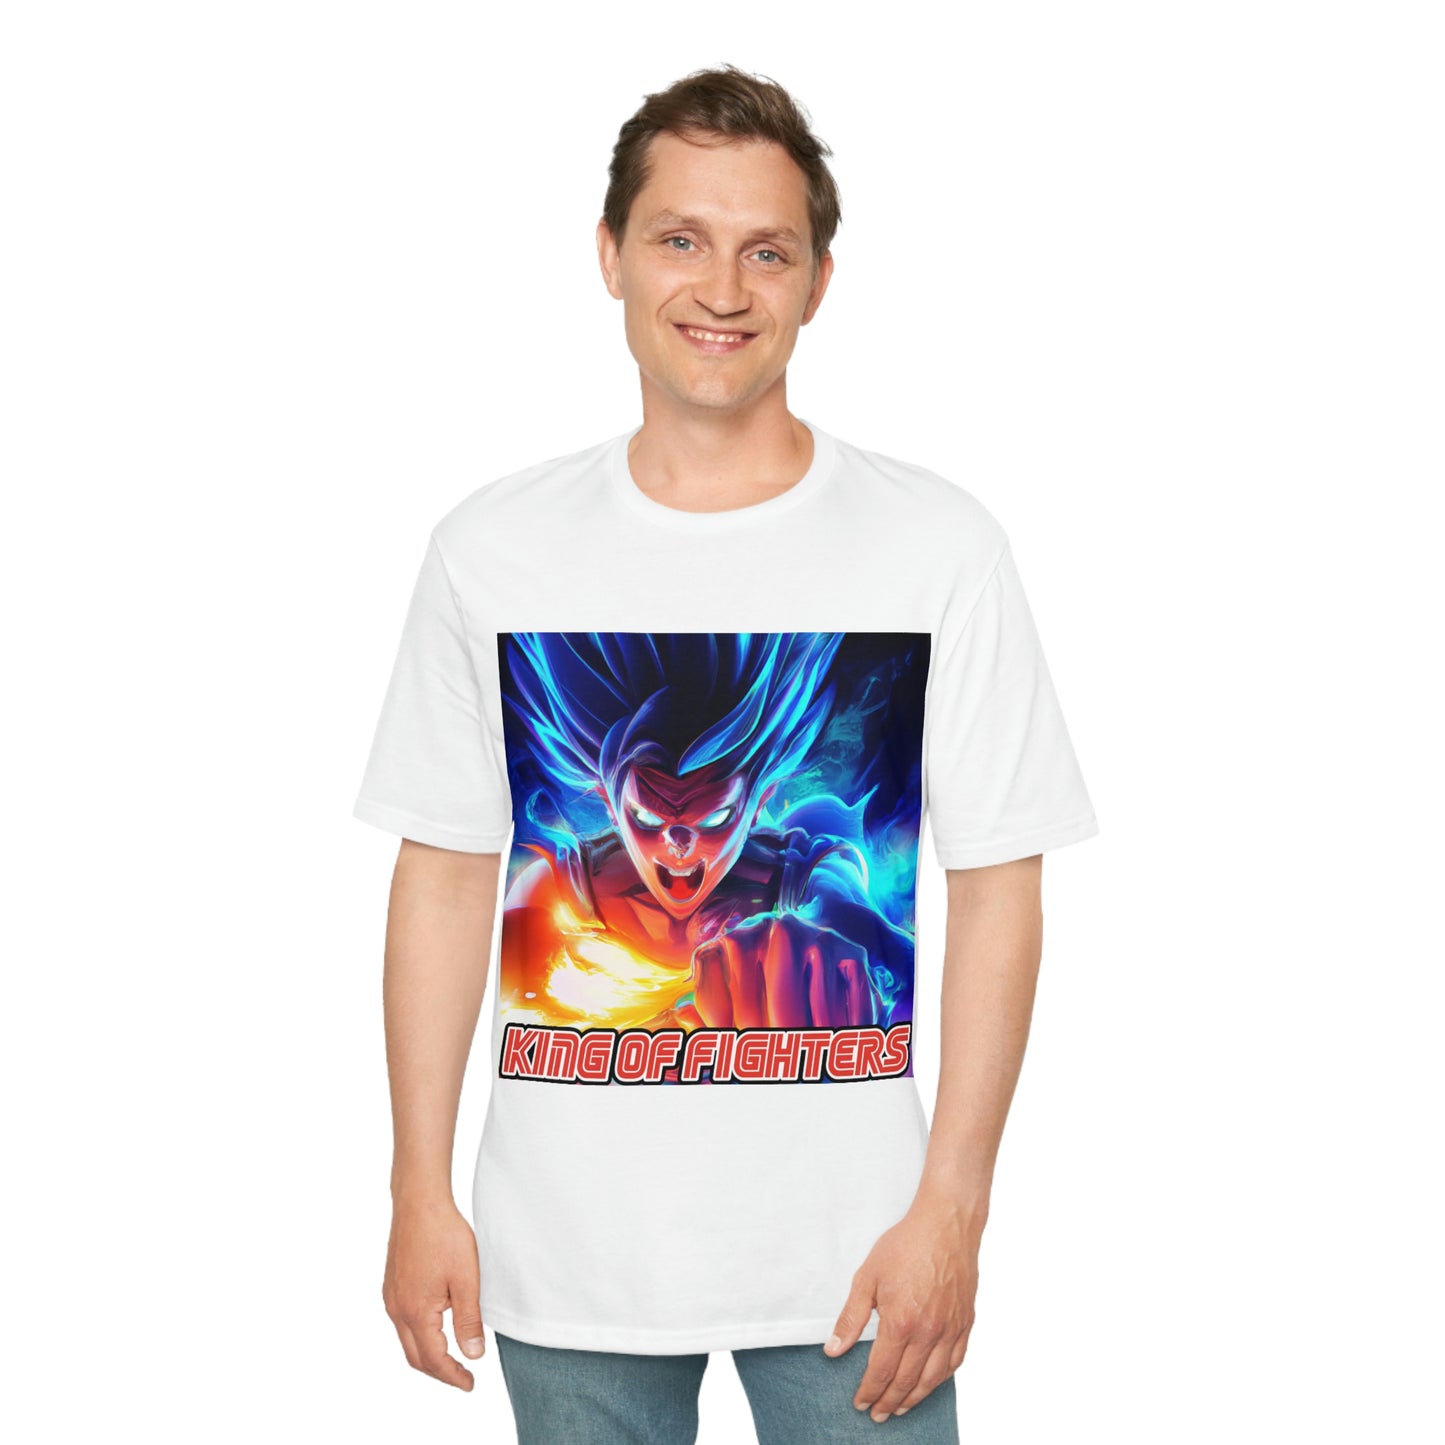 Atziluth Gallery "King of Fighters" Atz Gaming T-Shirt